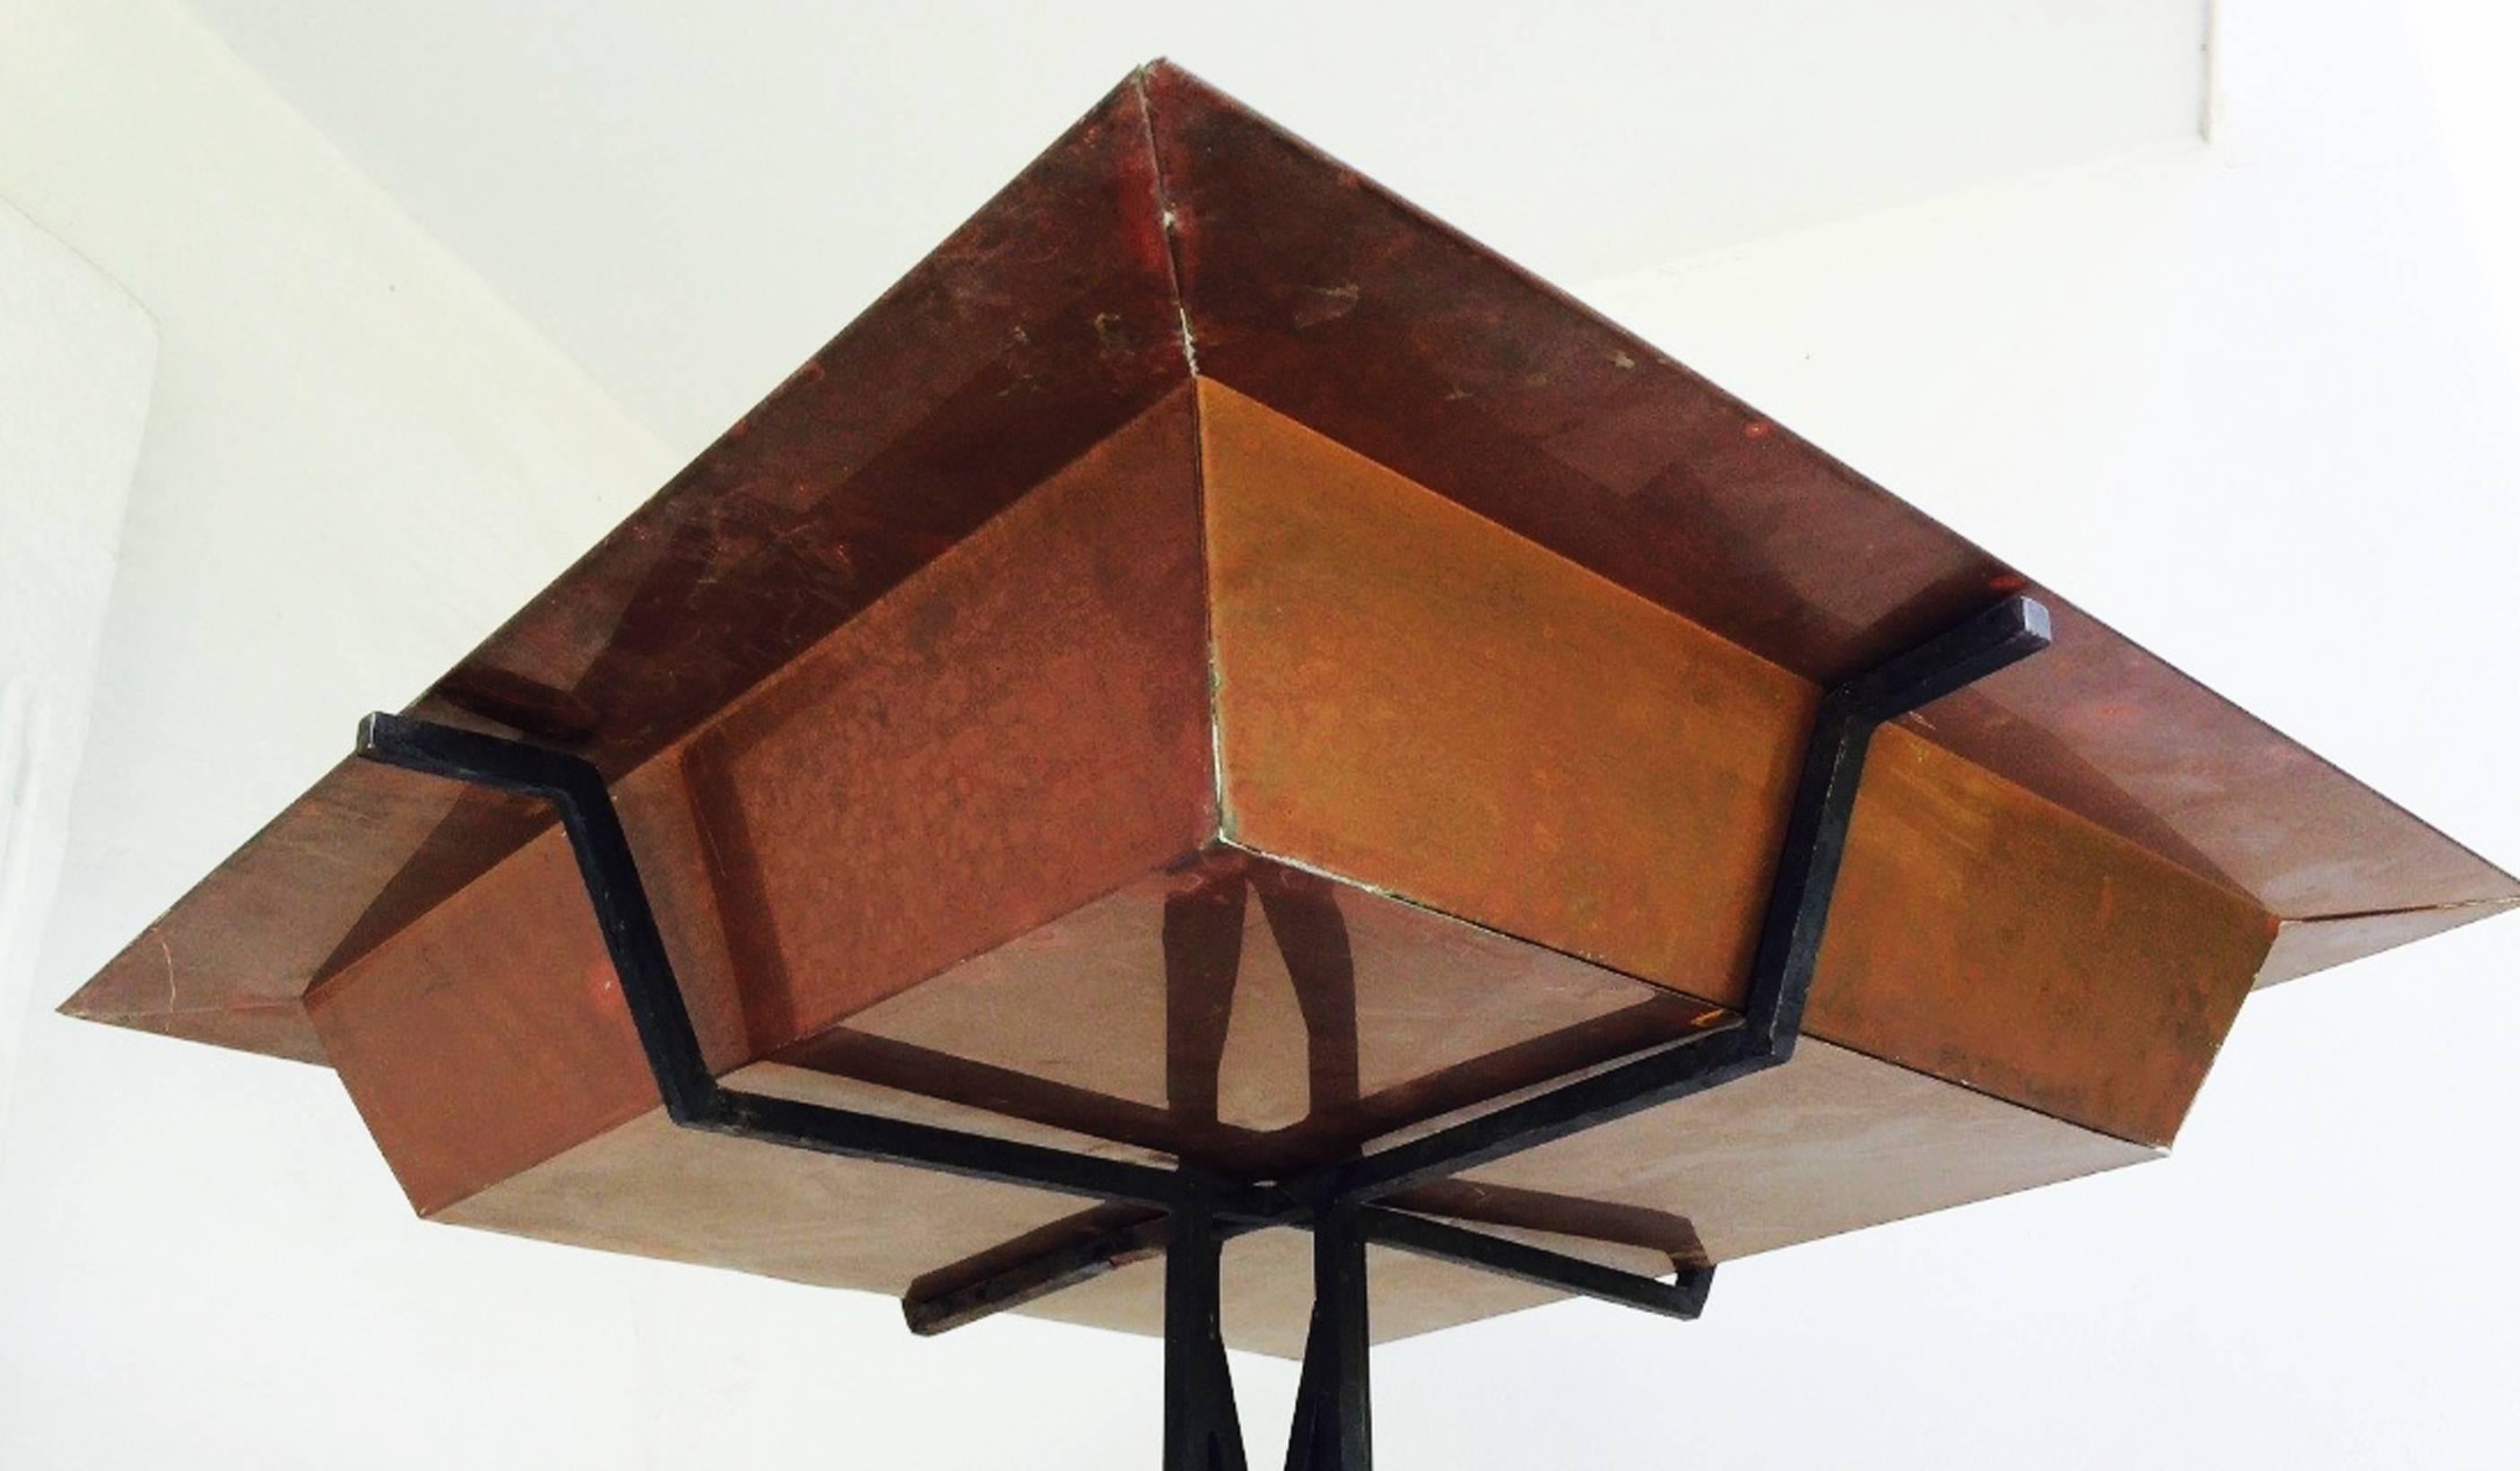 A rare and monumental wrought iron and copper plant stand for the Arizona Biltmore Hotel, Phoenix Arizona, 1929. Original item designed by Warren McArthur with consultations by Frank Lloyd Wright for the lobby of the iconic Biltmore Hotel. A